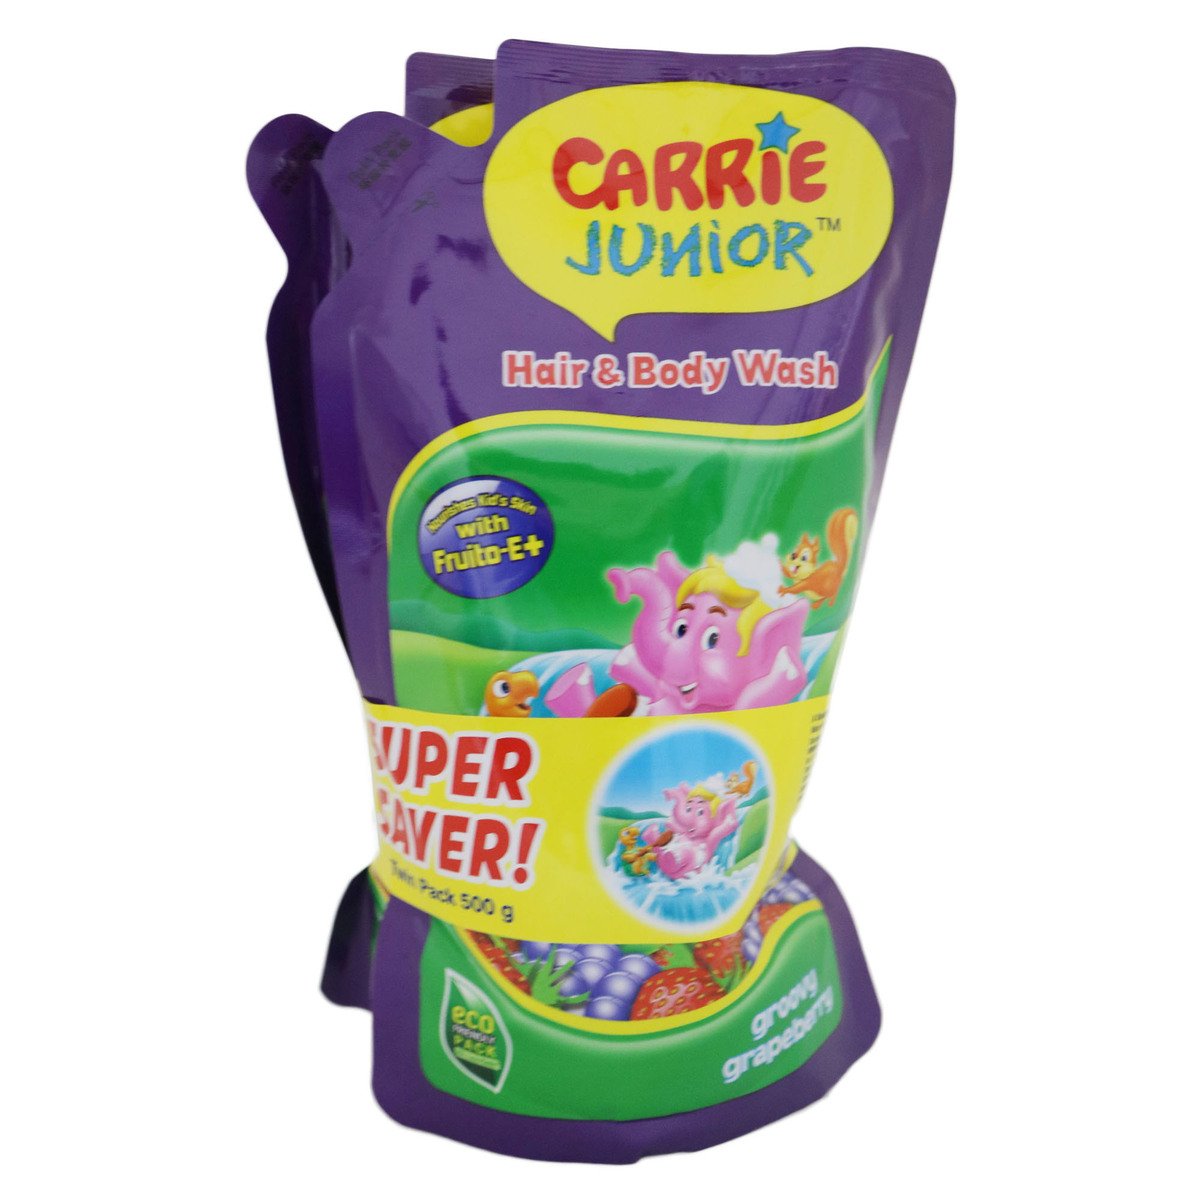 Carrie Junior Hair & Body Wash Groovy Grapeberry 2 x 500g